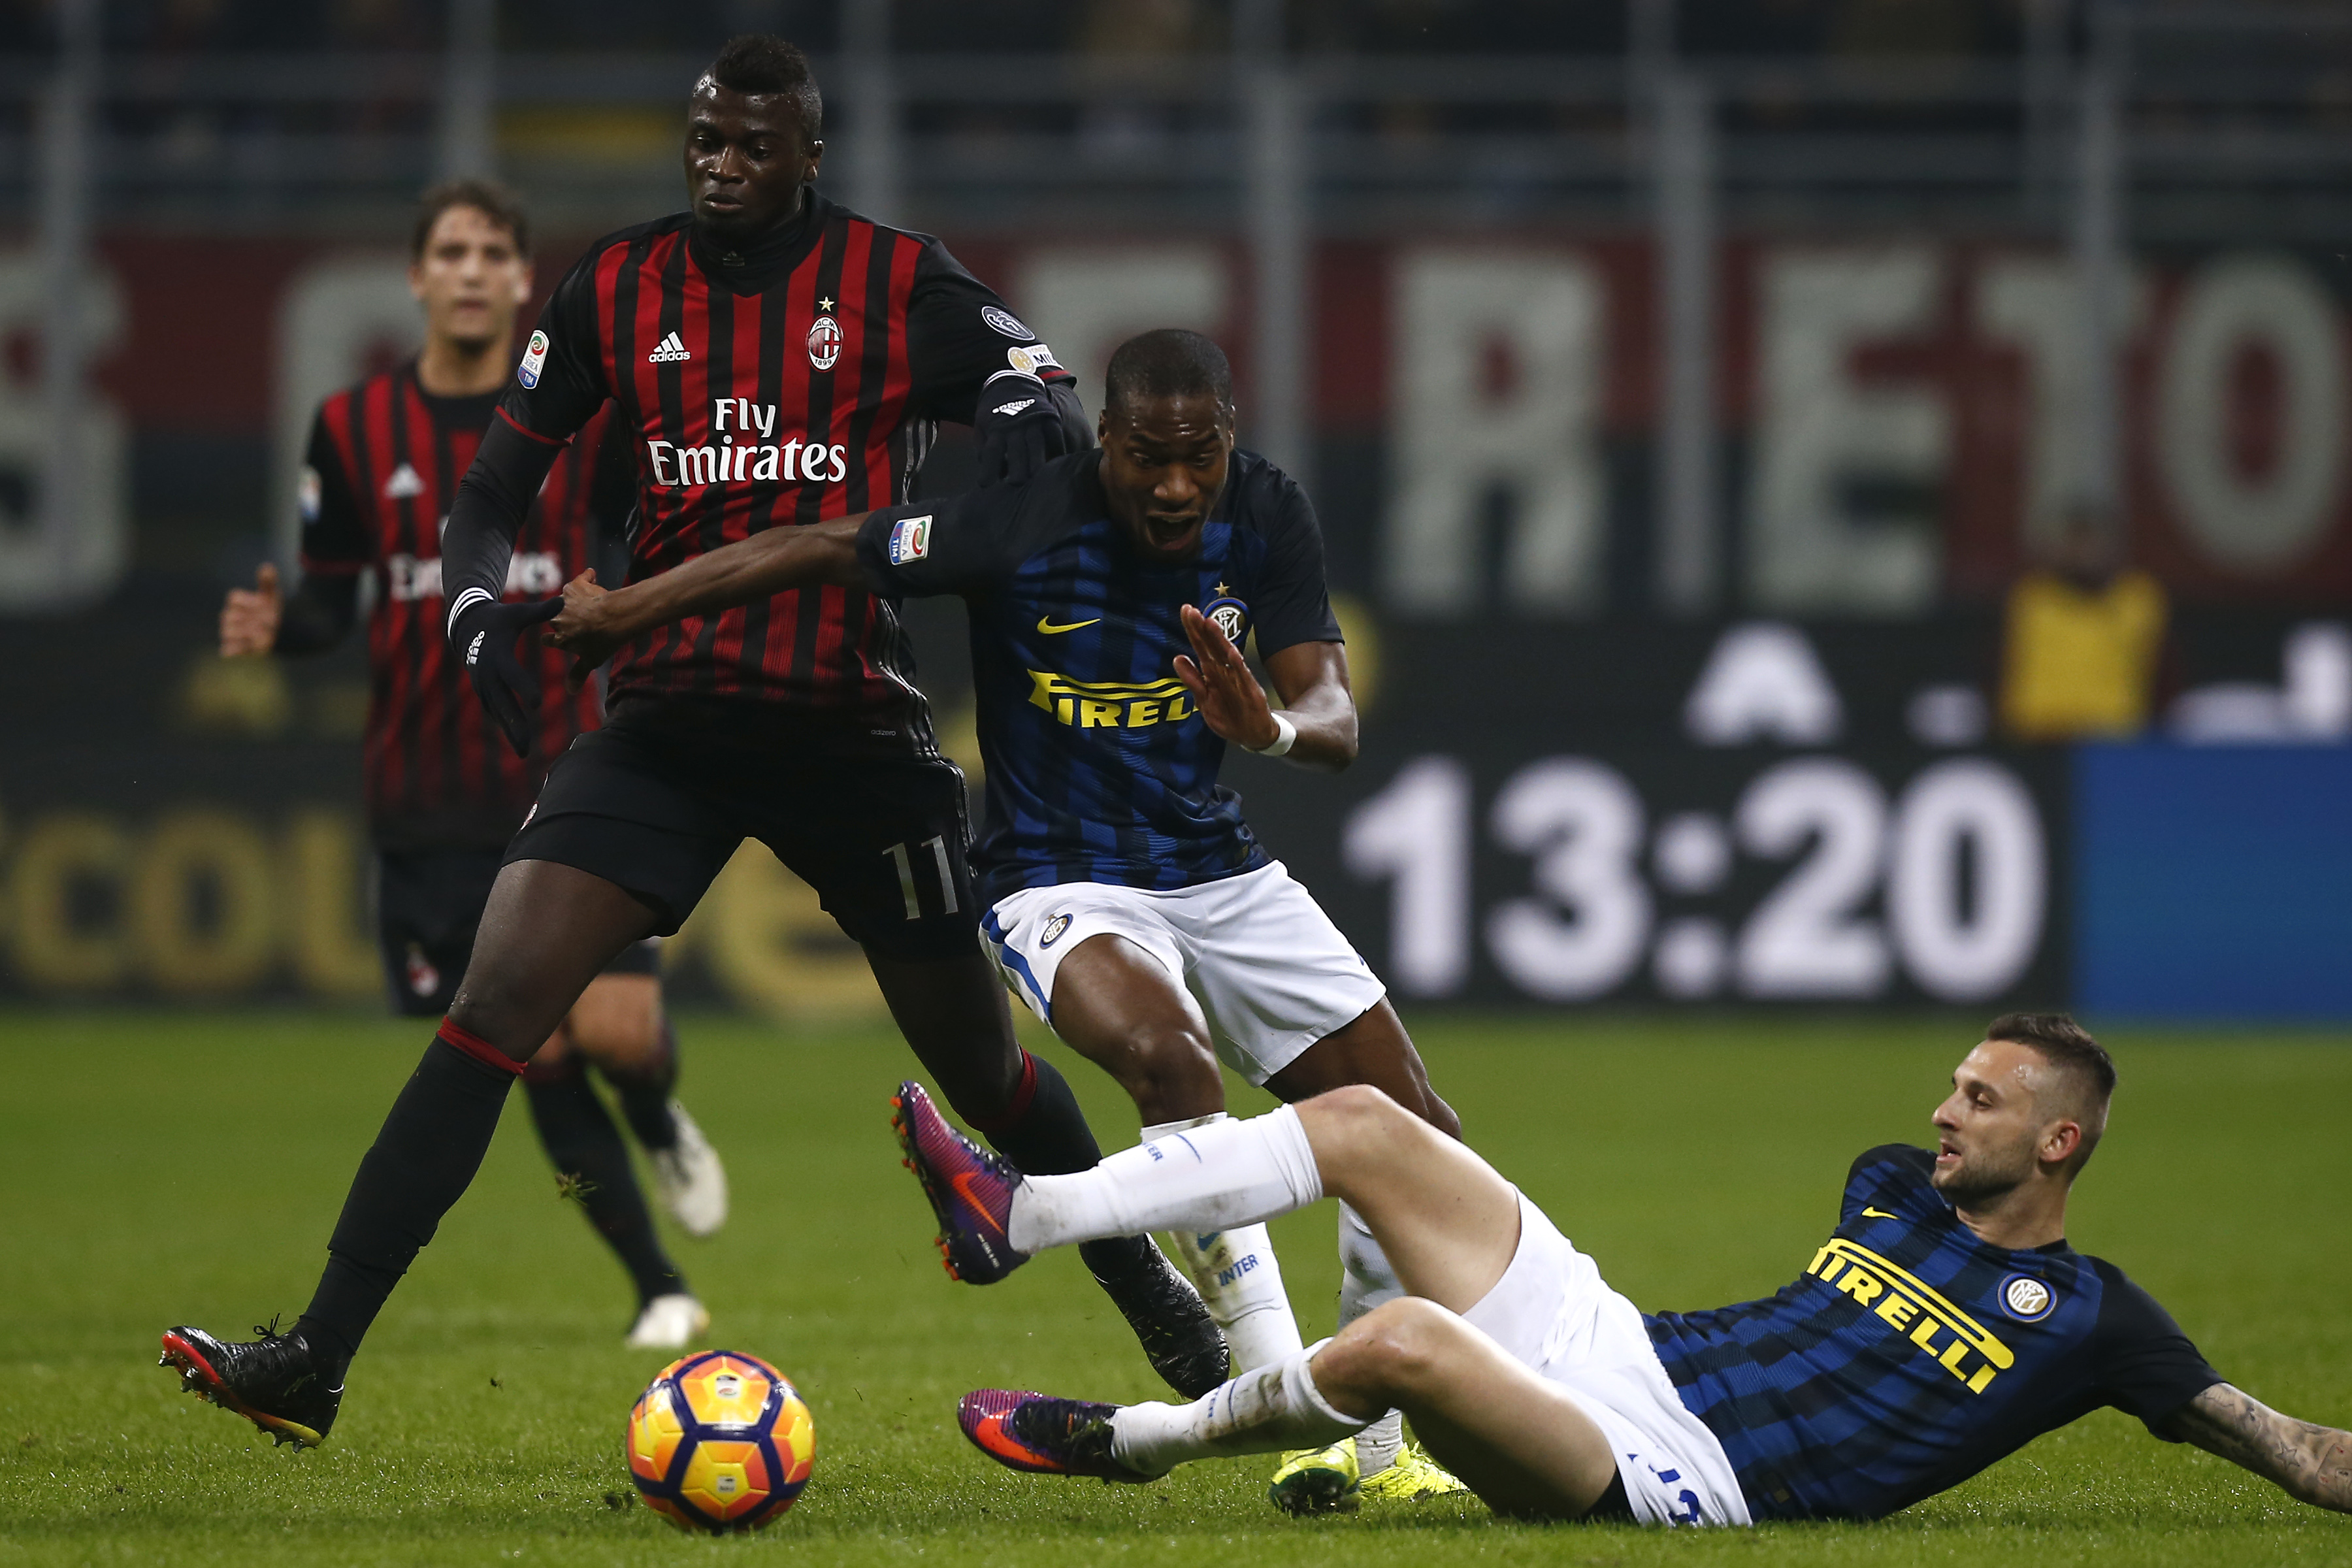 AC Milan's forward Mbaye Niang of France (L) fights for the ball with Inter Milan's midfielder Geoffrey Kondogbia from France (C) and Inter Milan's midfielder Marcelo Brozovic from Croatia during the Italian Serie A football match AC Milan Vs Inter Milan on November 20, 2016 at the 'San Siro Stadium' in Milan.  / AFP / MARCO BERTORELLO        (Photo credit should read MARCO BERTORELLO/AFP/Getty Images)